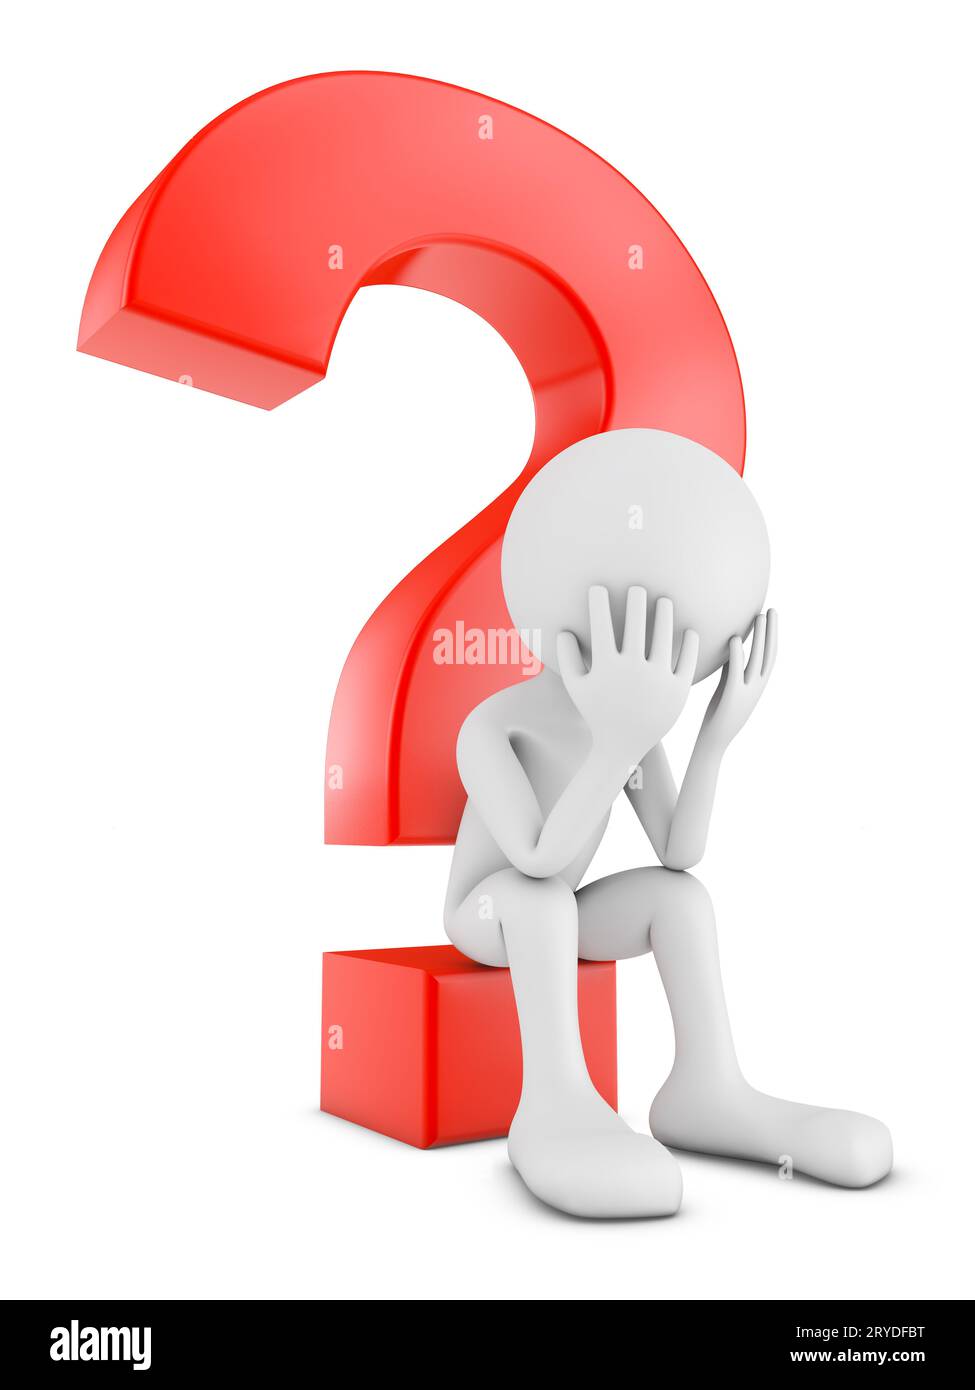 Man with question mark Stock Photo